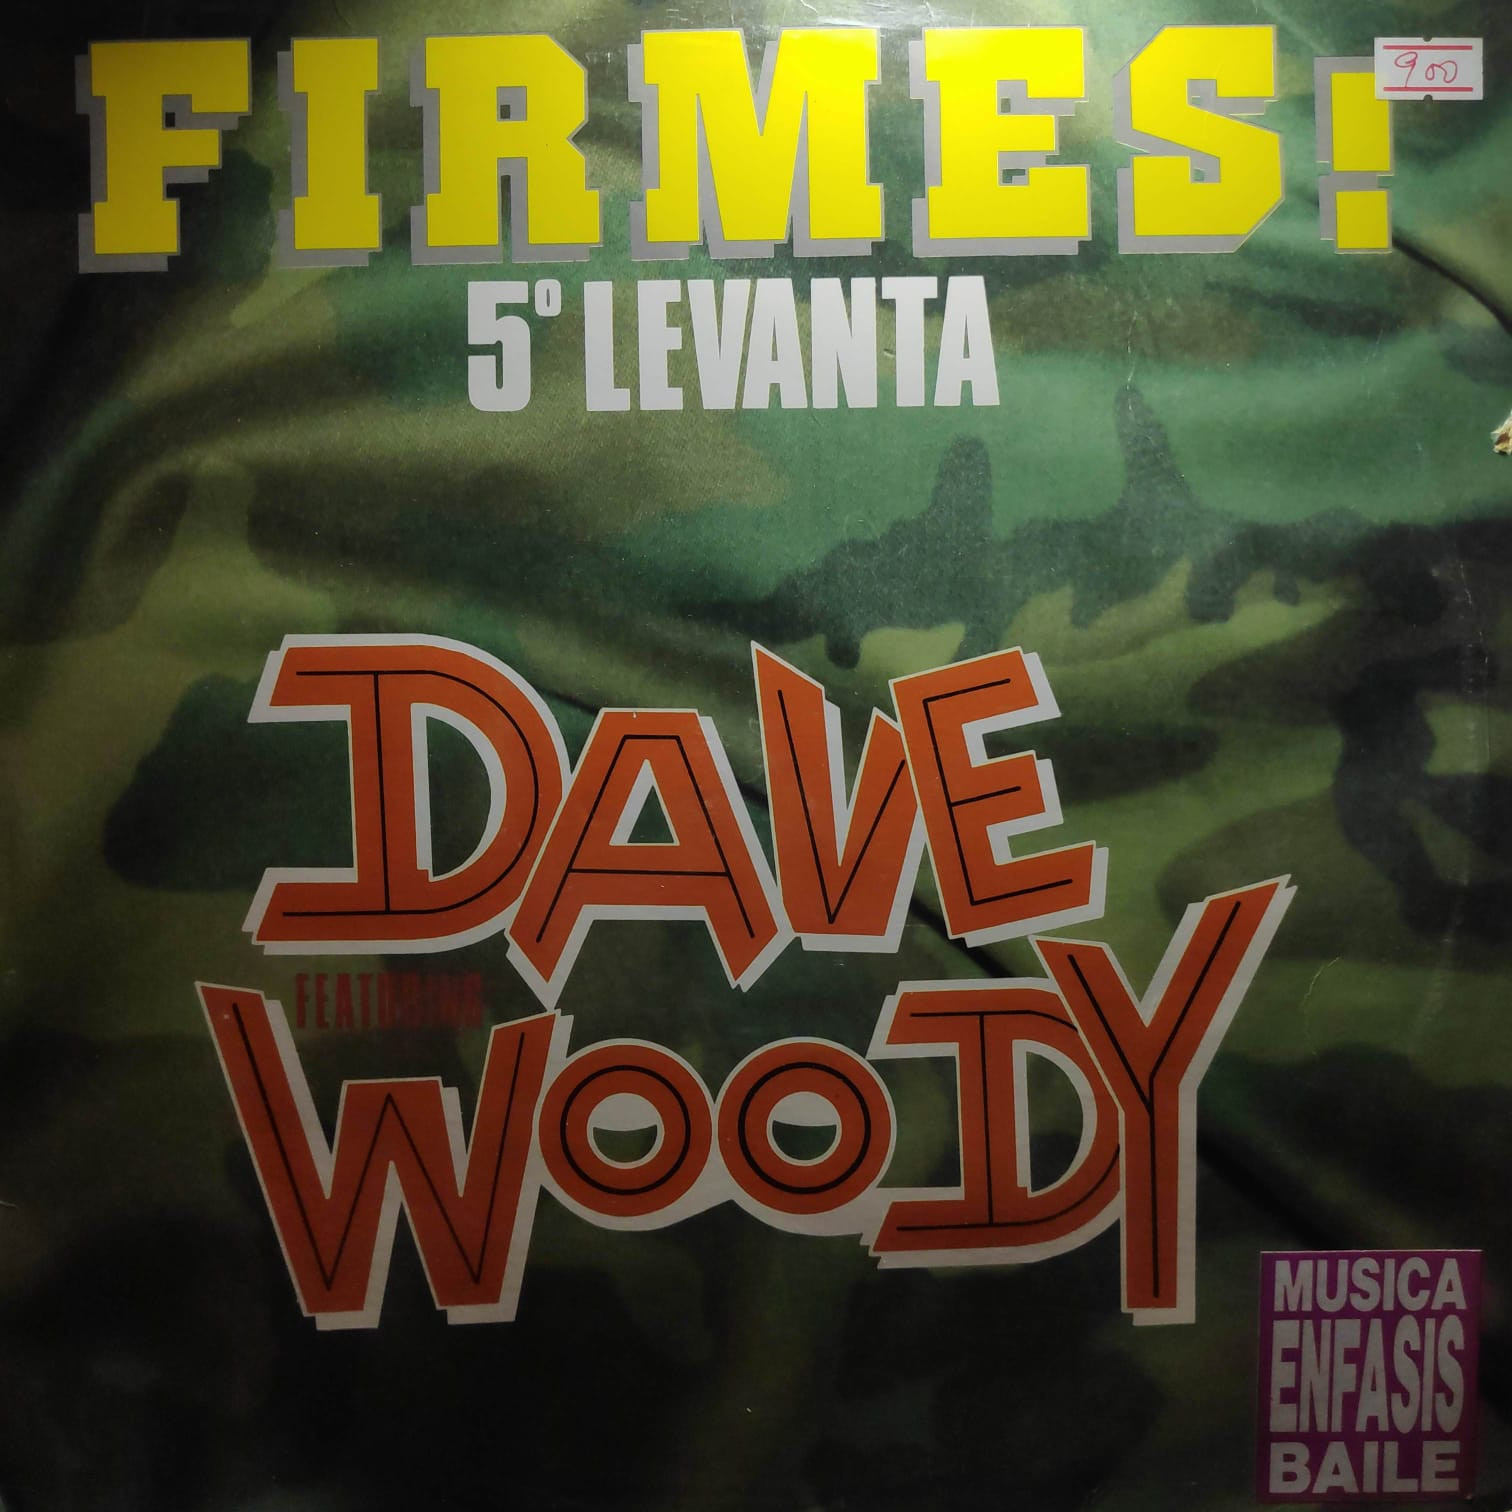 (28994) Dave Featuring Woody ‎– Firmes (5º Levanta)